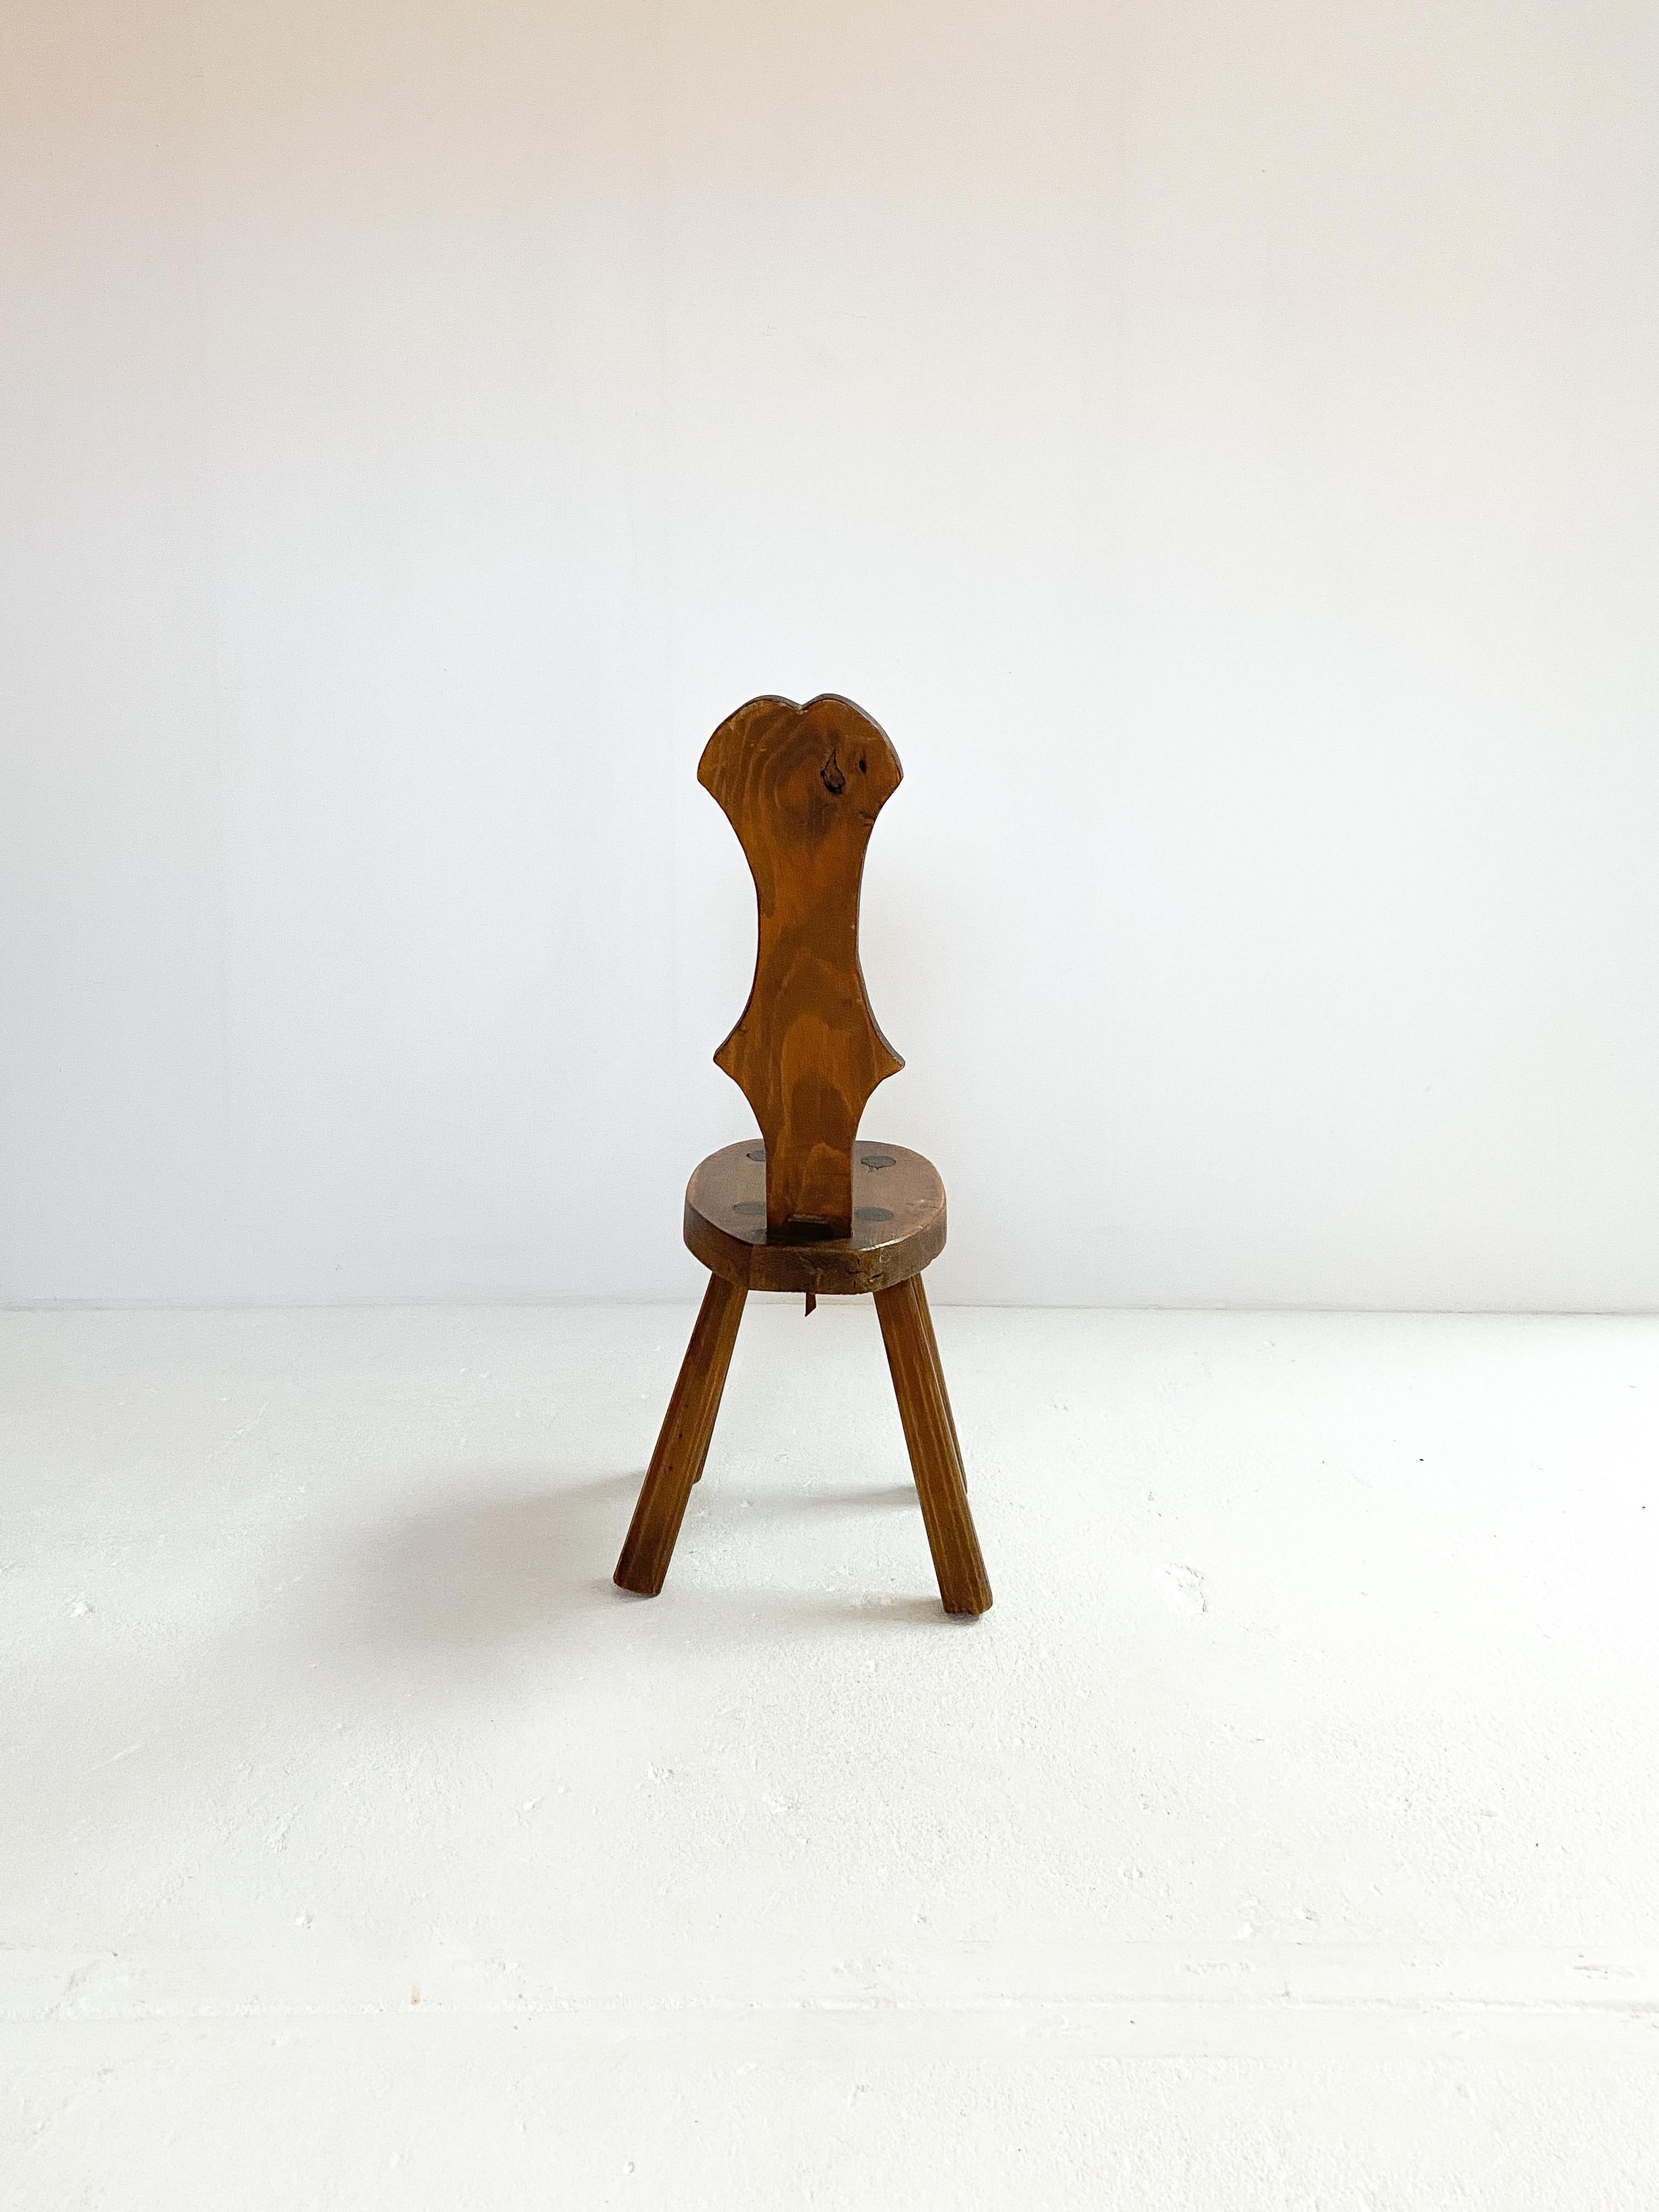 European Brutalist Hand Carved Pine Stool/Chair with Violin Back, French, 1950s For Sale